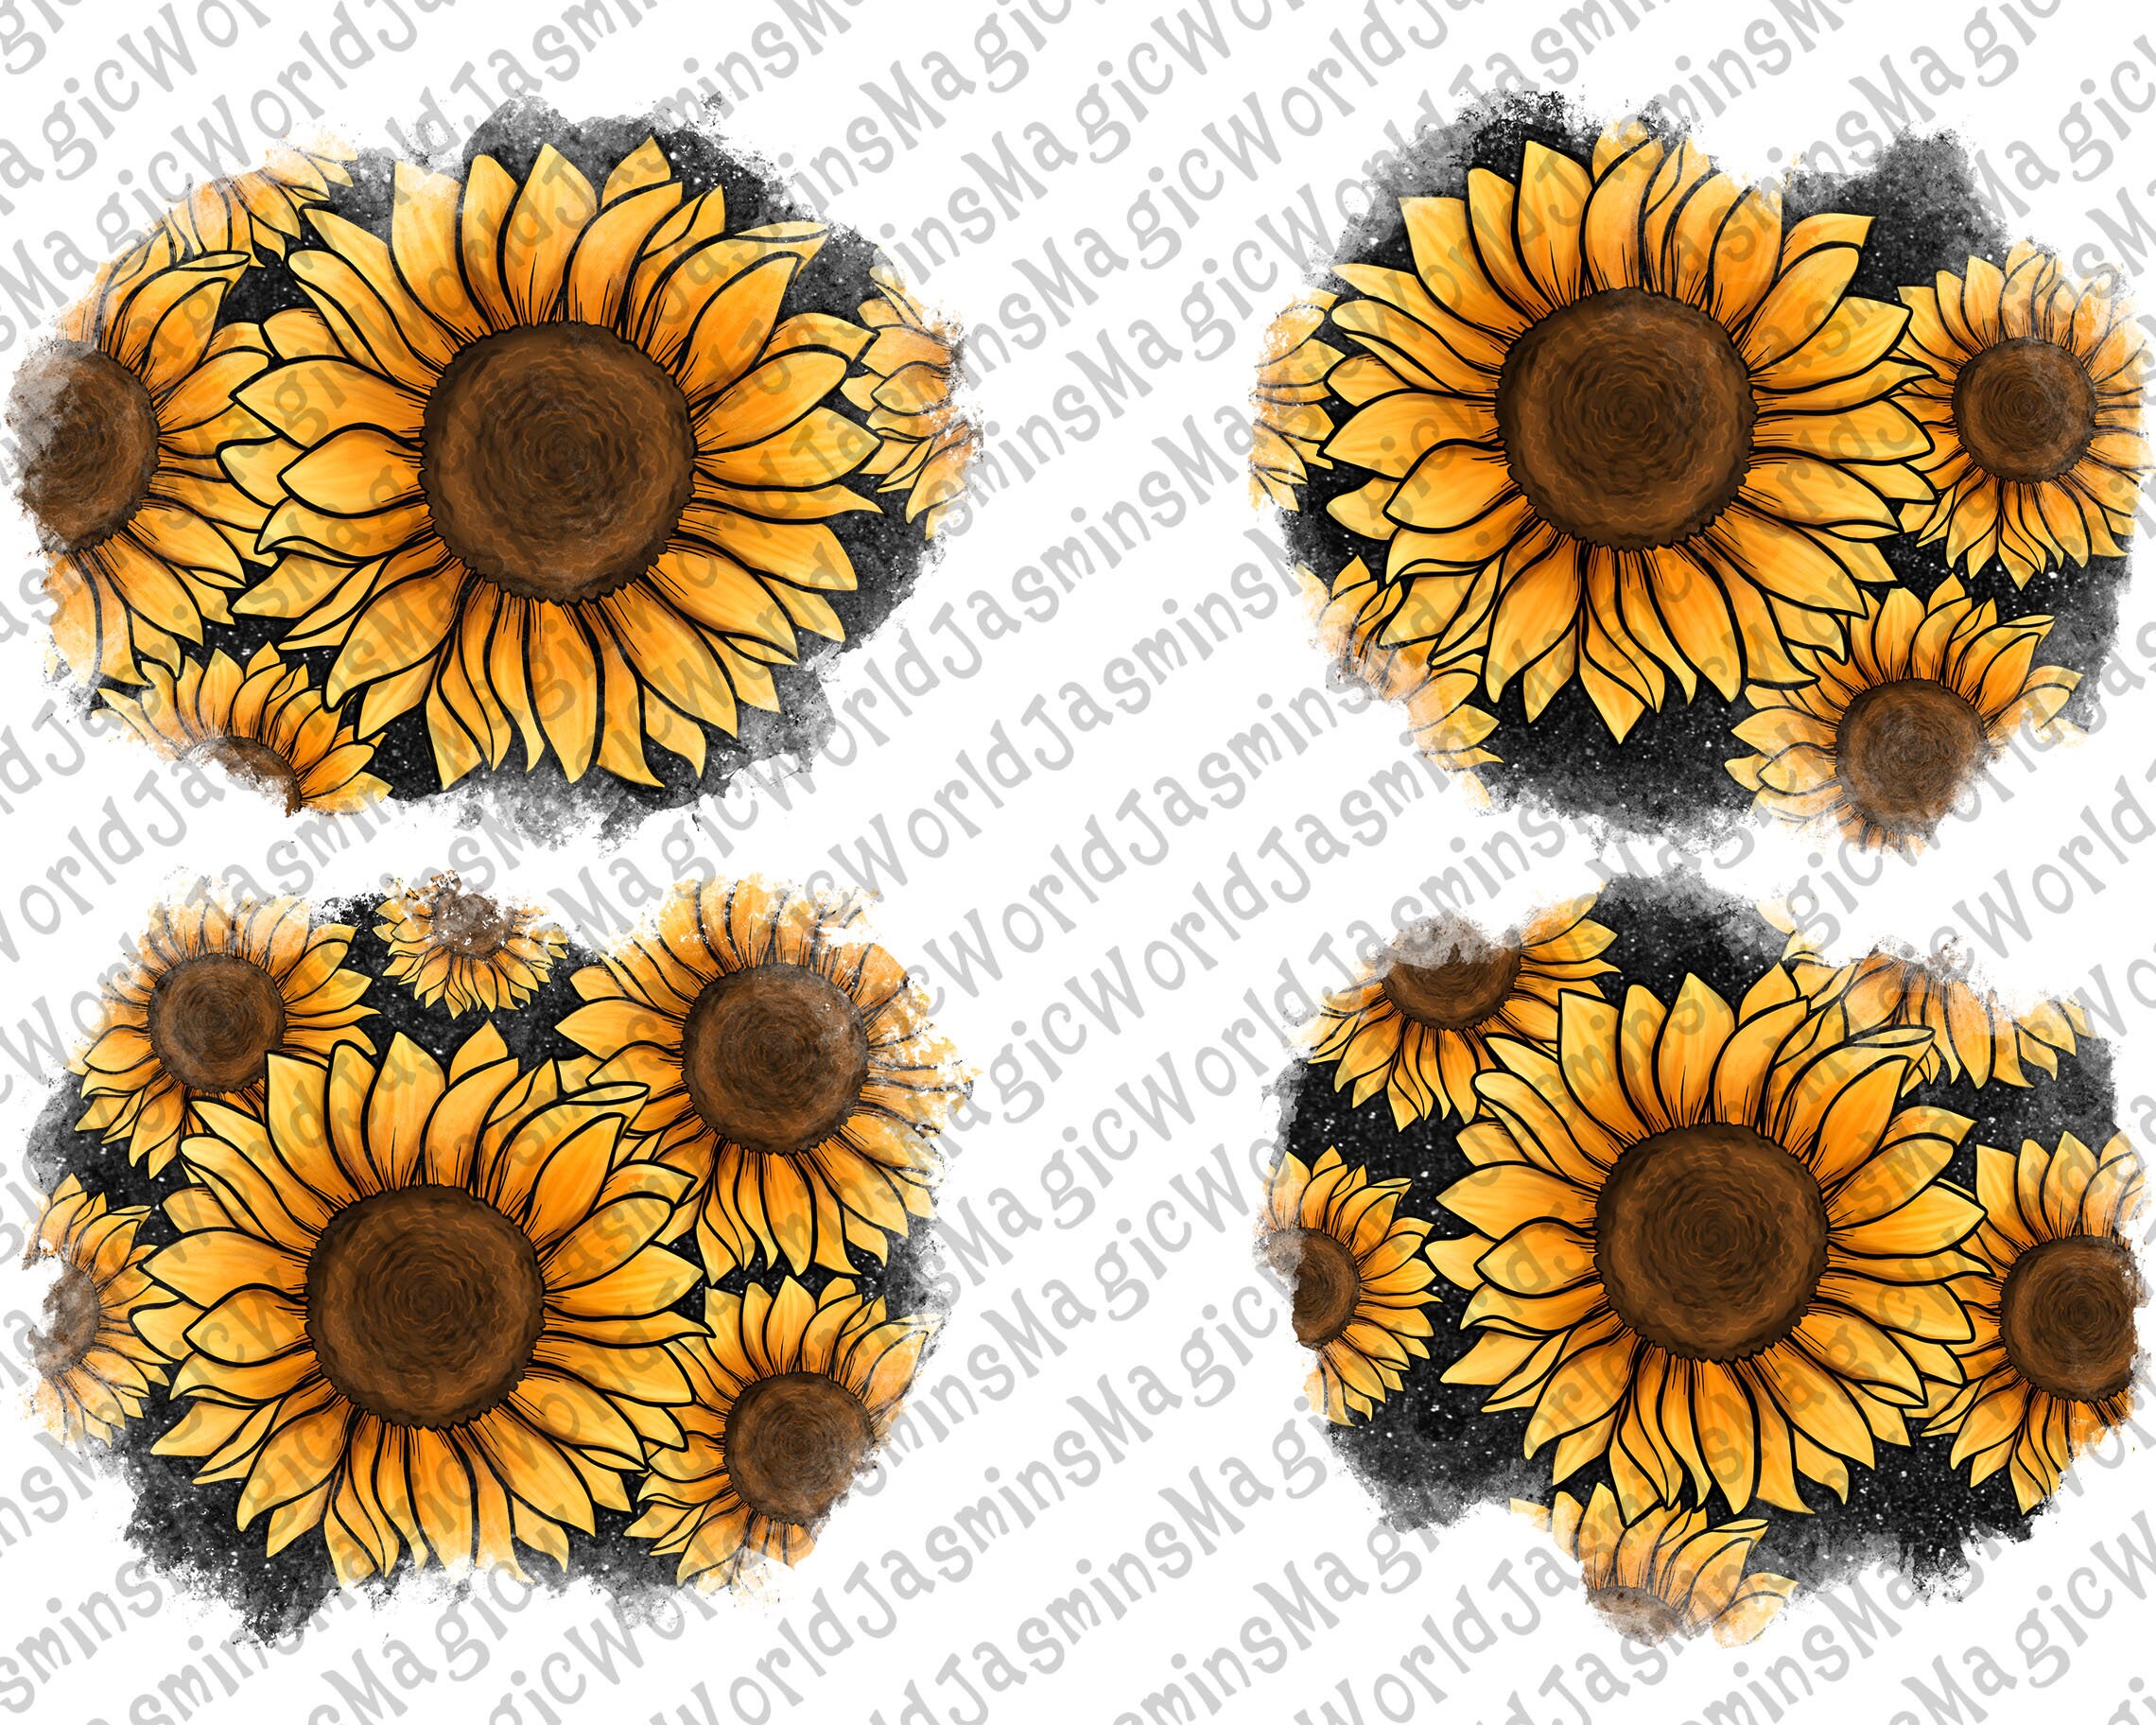 18Pcs Sunflowers Embroidered Iron On Patches Set Decorative Flower Sewing Patch DIY Arts Crafts Decoration Embroidered Patches Pack Sew On Patches for Clothing Jeans Caps Jacket Backpack Repair Patch 